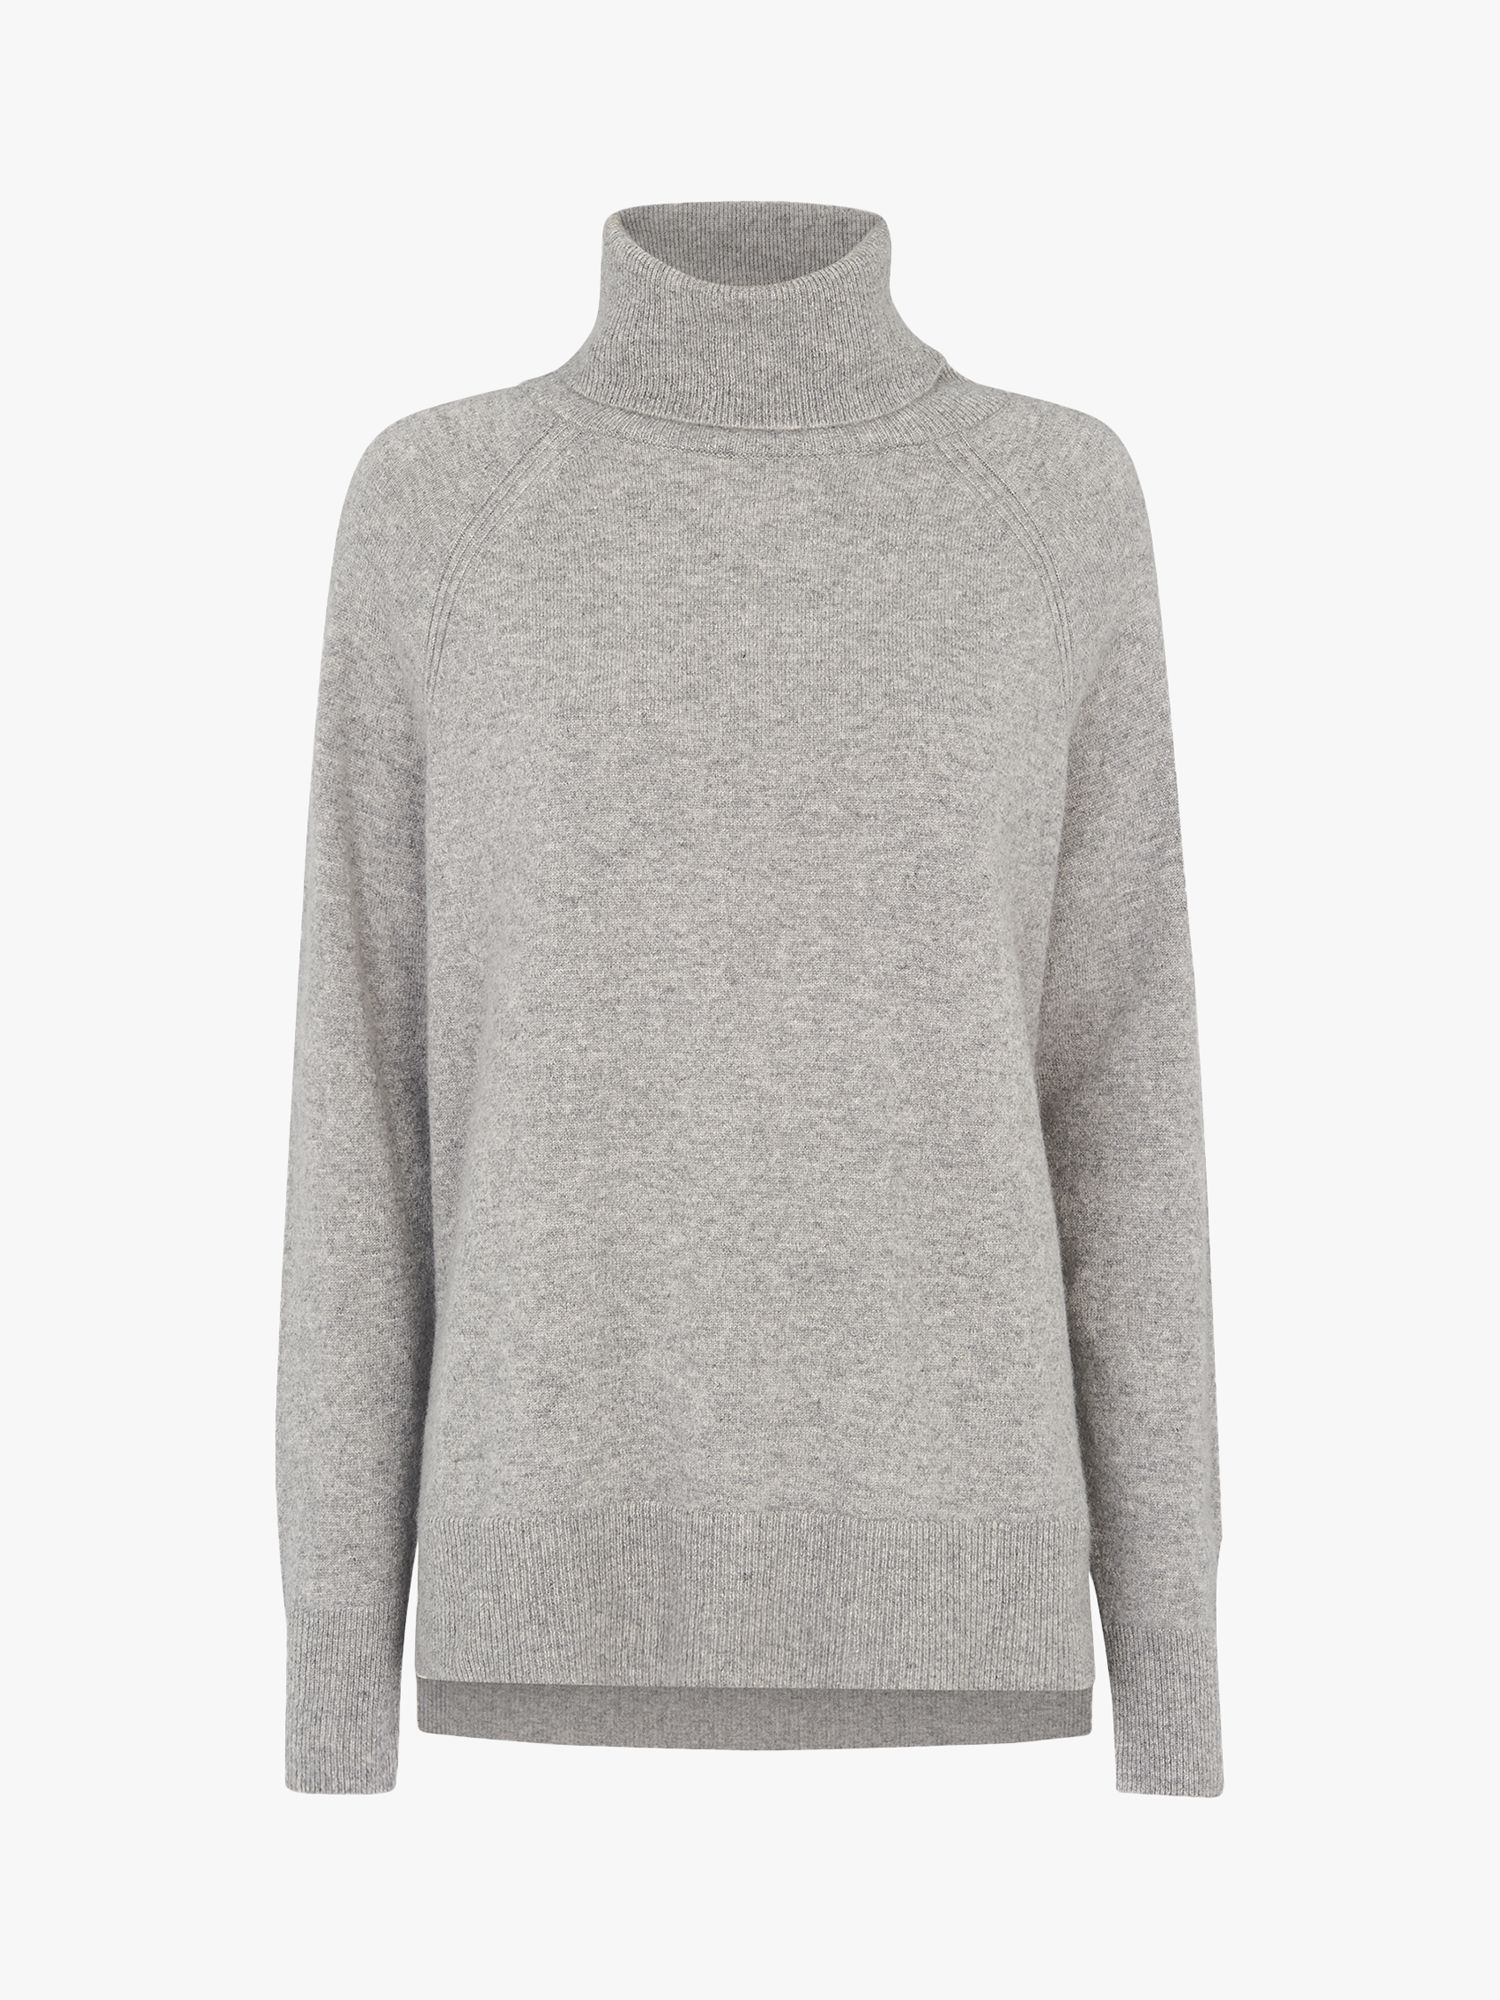 Whistles Cashmere Roll Neck Jumper, Grey at John Lewis & Partners